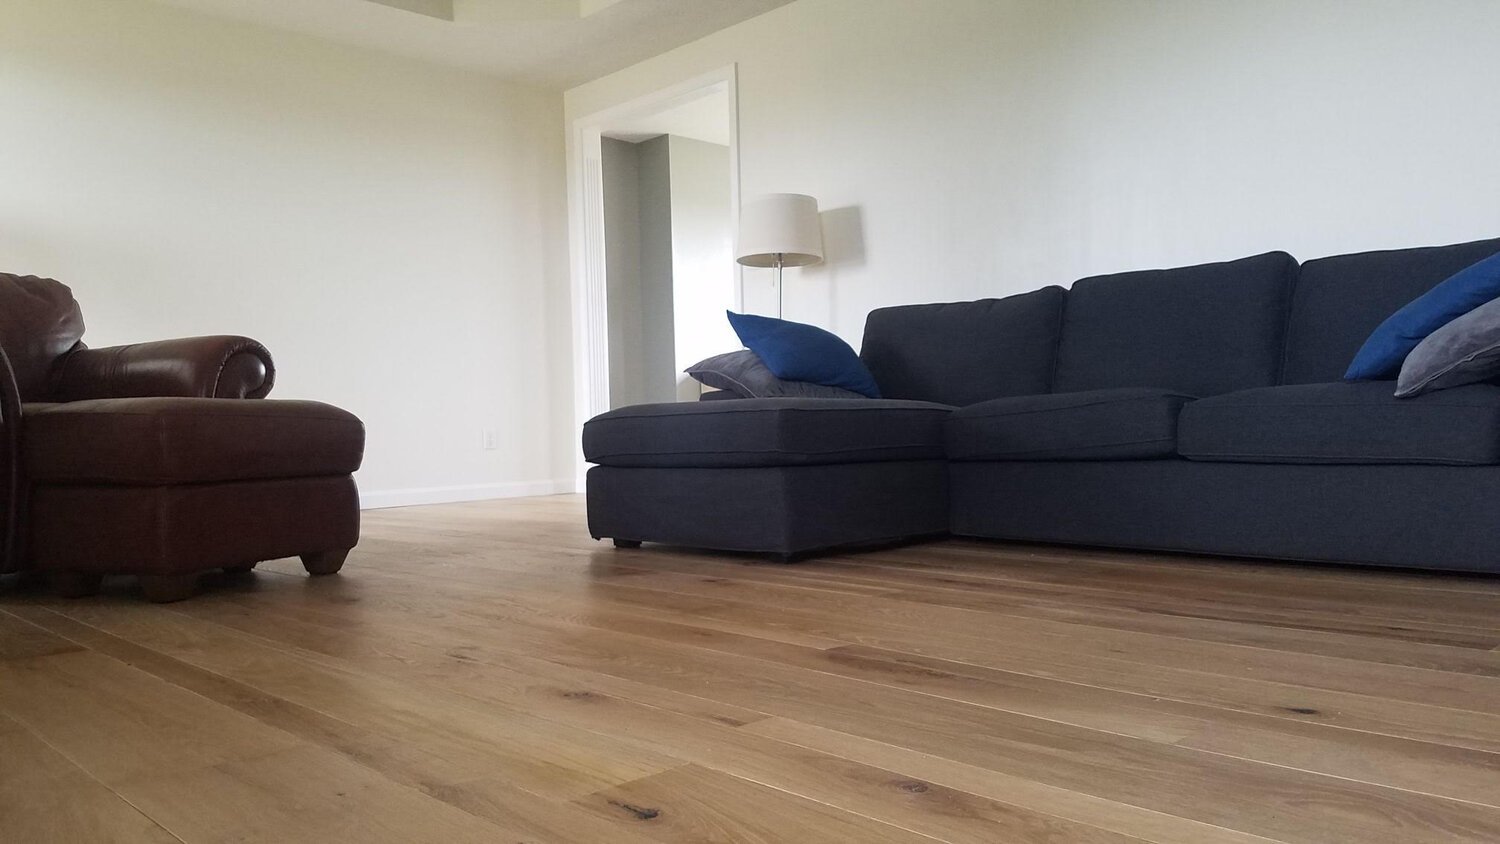  Todd visited us in February of this year to pick up a trailer full of white oak flooring for his living room remodel. This was to be his first experience installing hardwood, so he had some reservations initially, but after a few phone calls back an